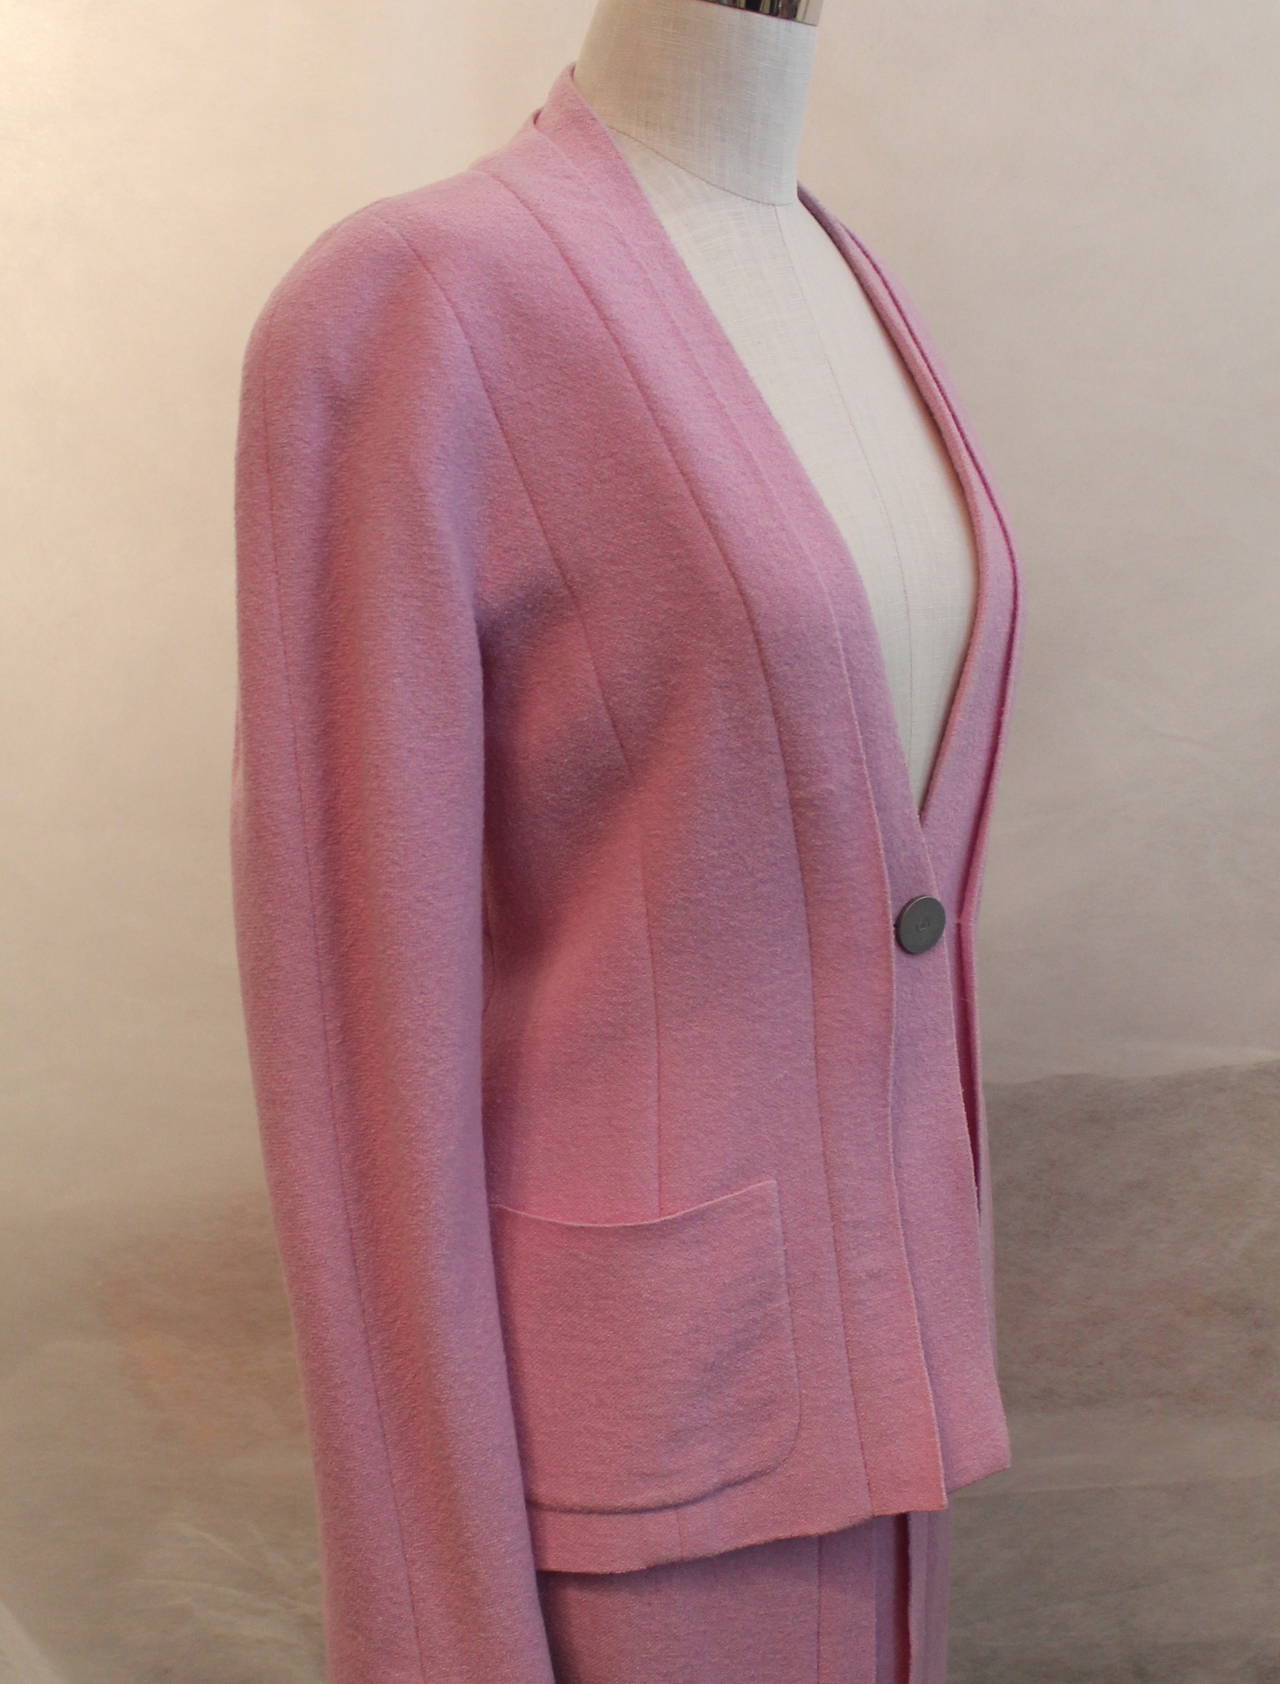 Chanel 1999 Vintage Pink/Lavender Pleated Skirt Suit - 38. This suit is in excellent condition and is 88% wool and 12% polyamide. The jacket has 2 front pockets and a vertical pleat detail. 

Measurements:

Jacket 
Bust- 36